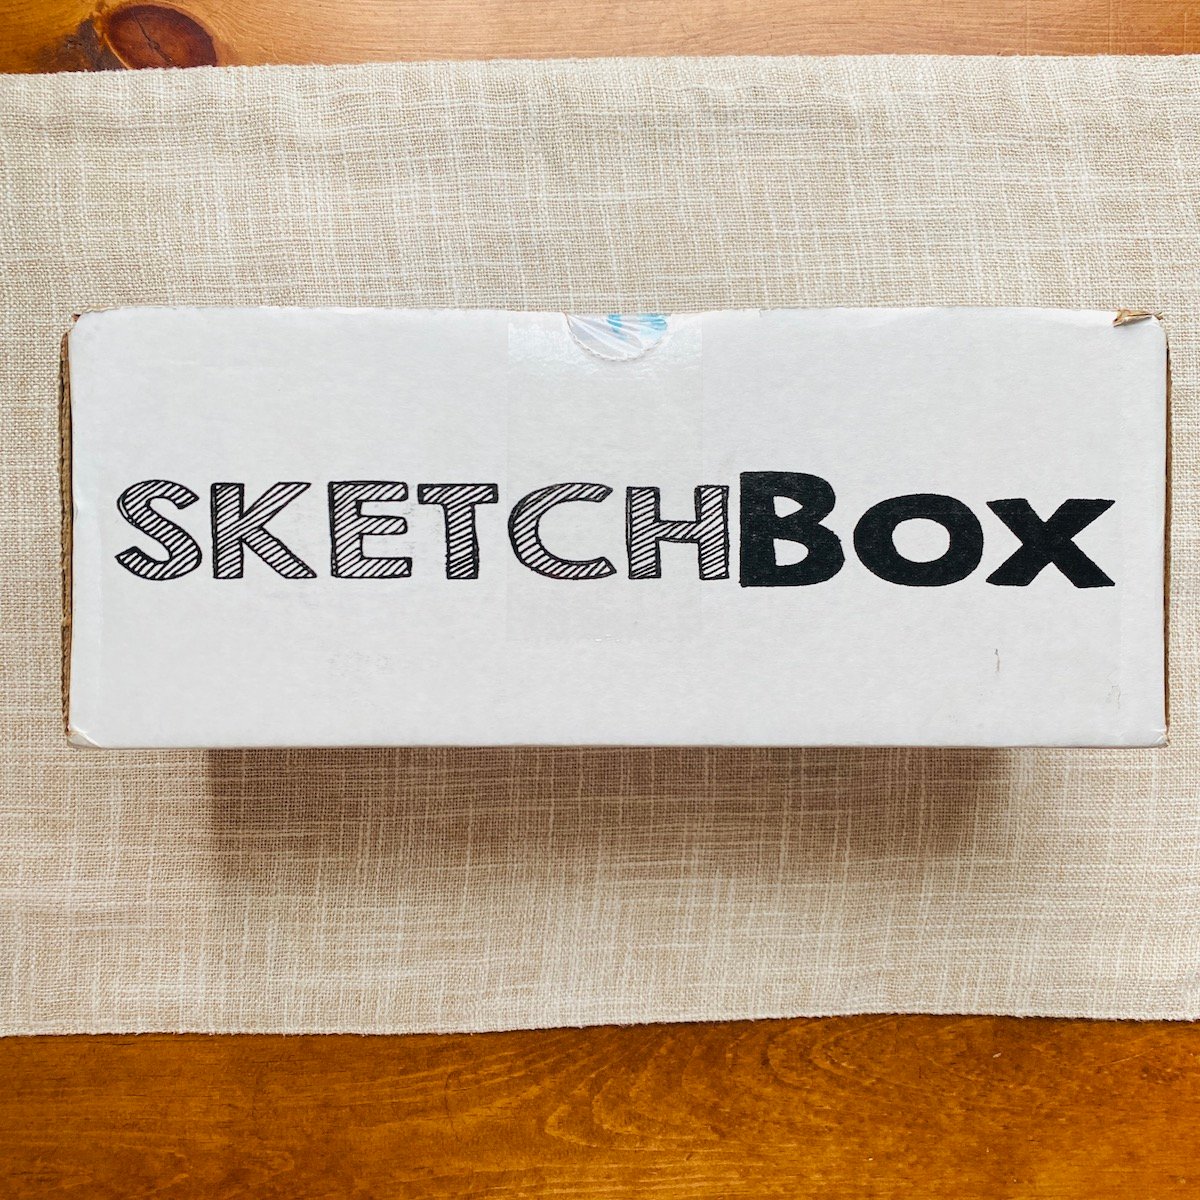 SketchBox Subscription Box Review March 2023